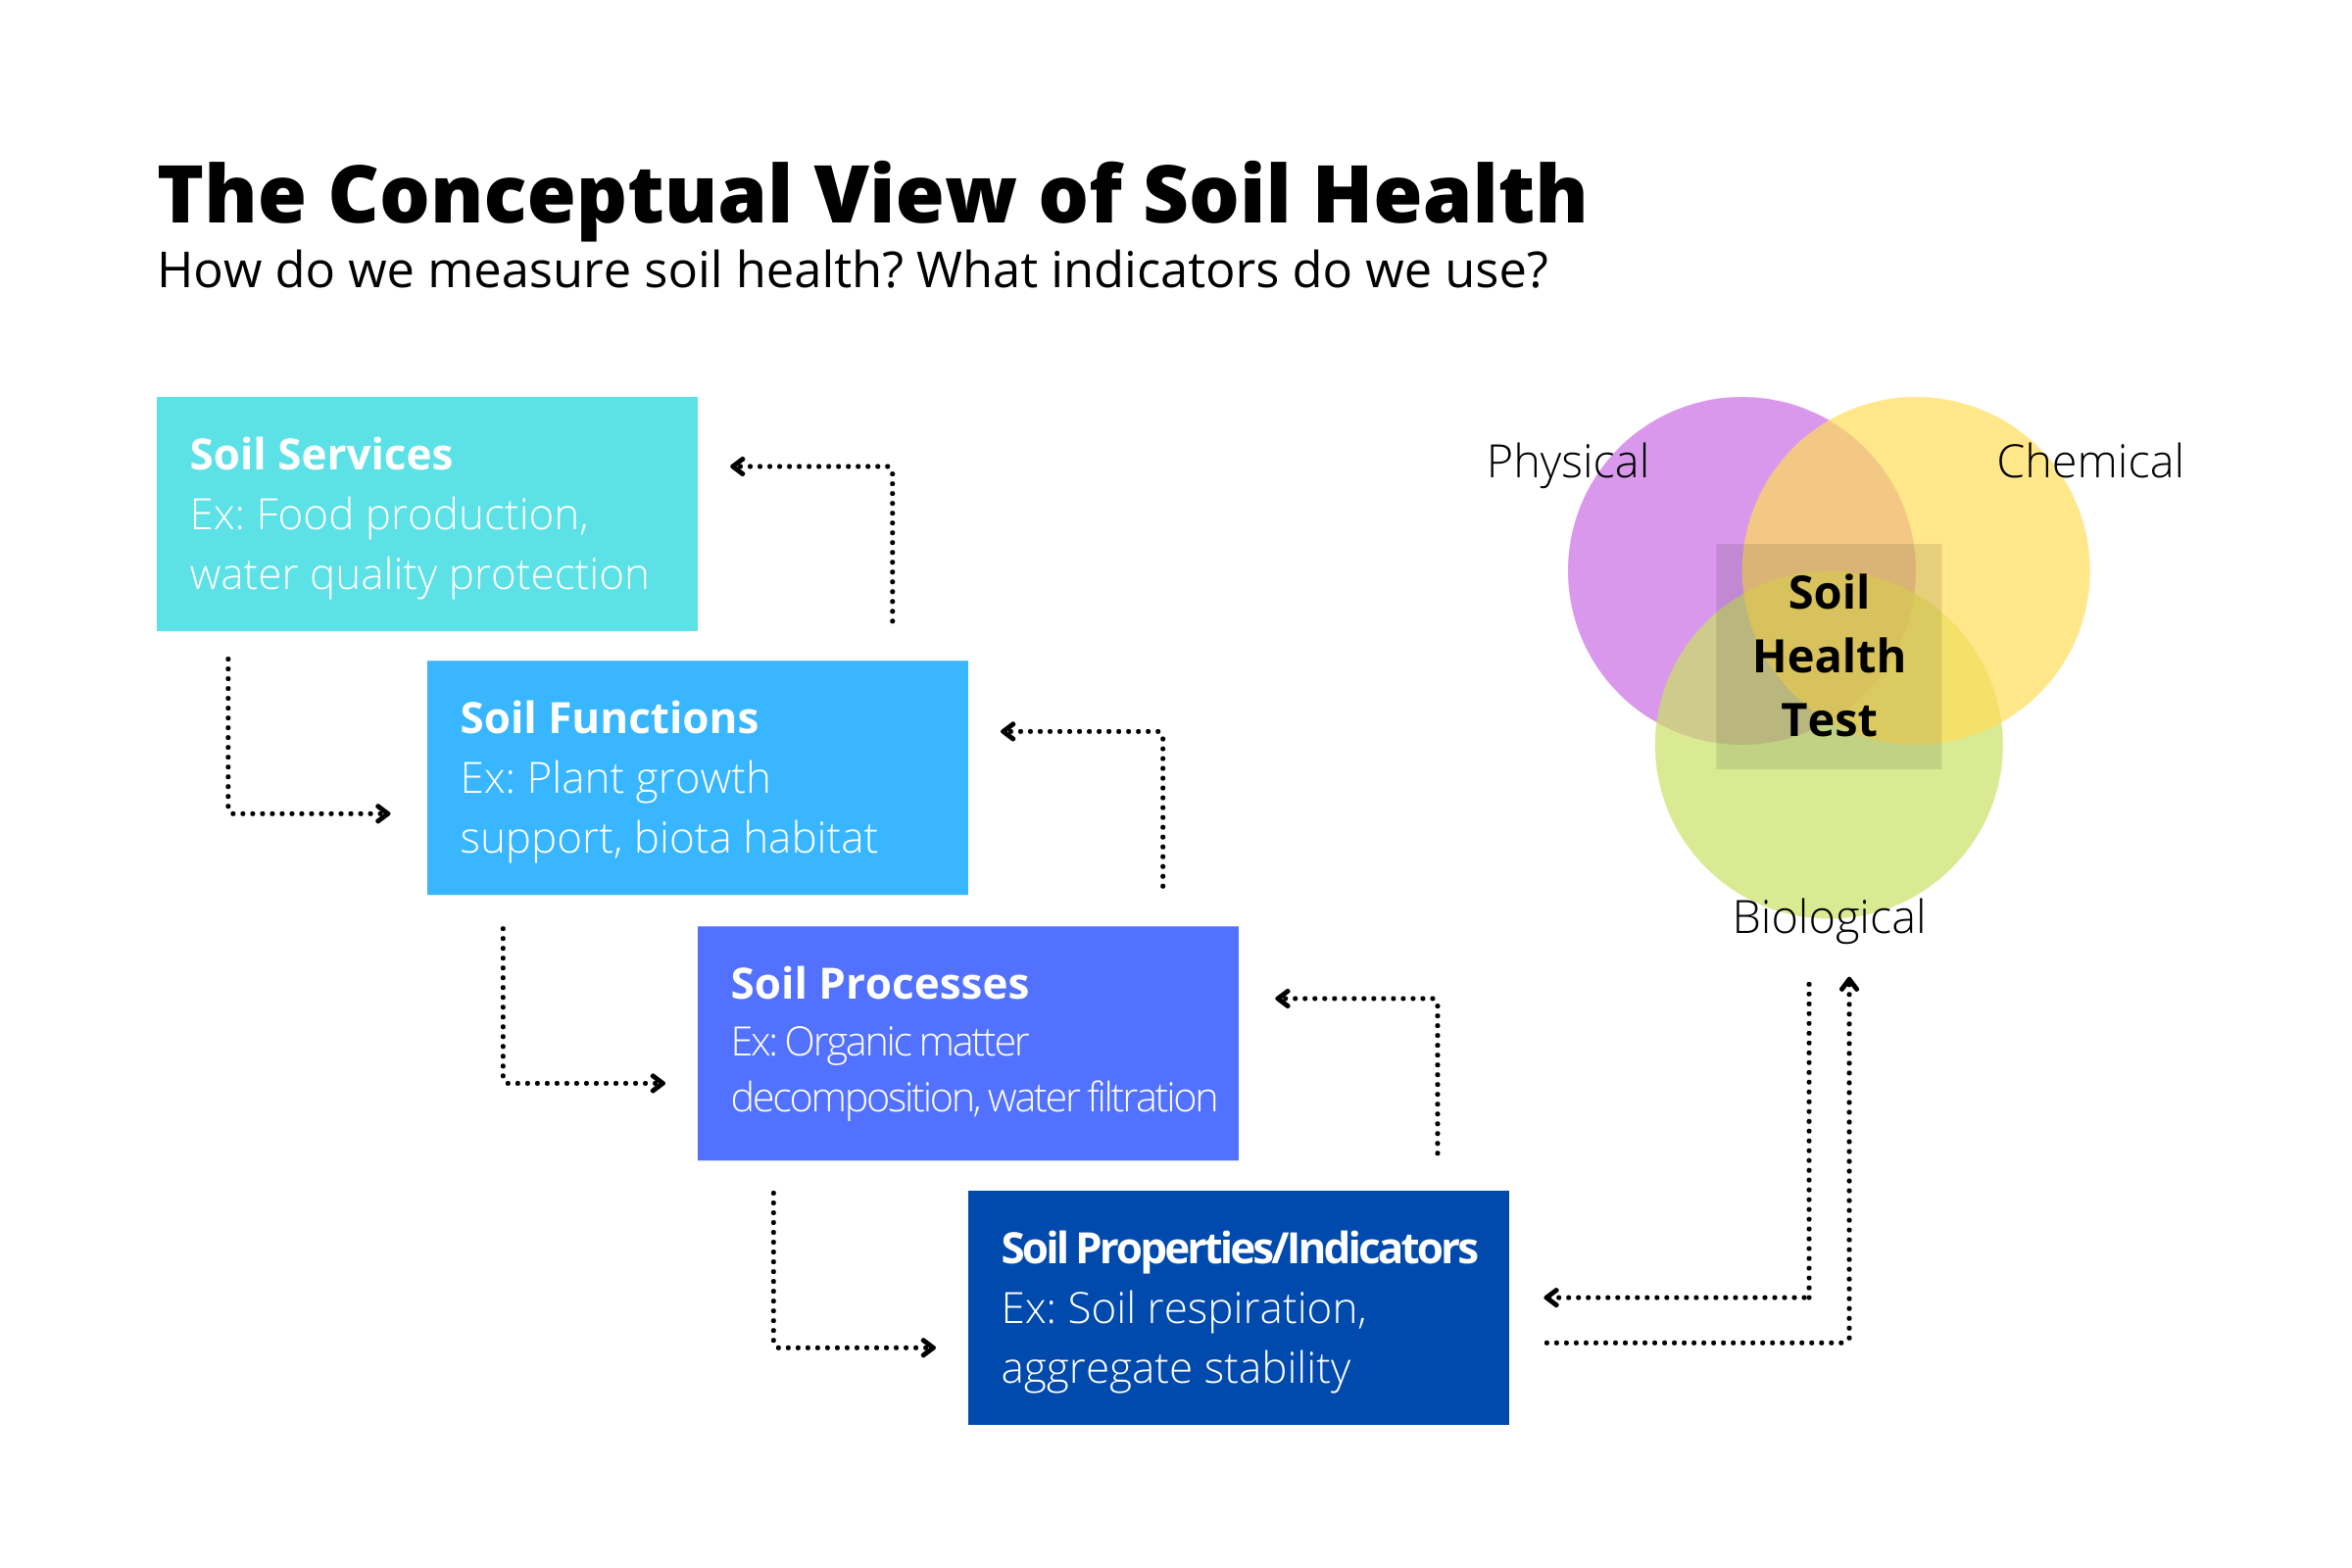 A chart showing a conceptual view of soil health, including the indicators used for some soil health properties